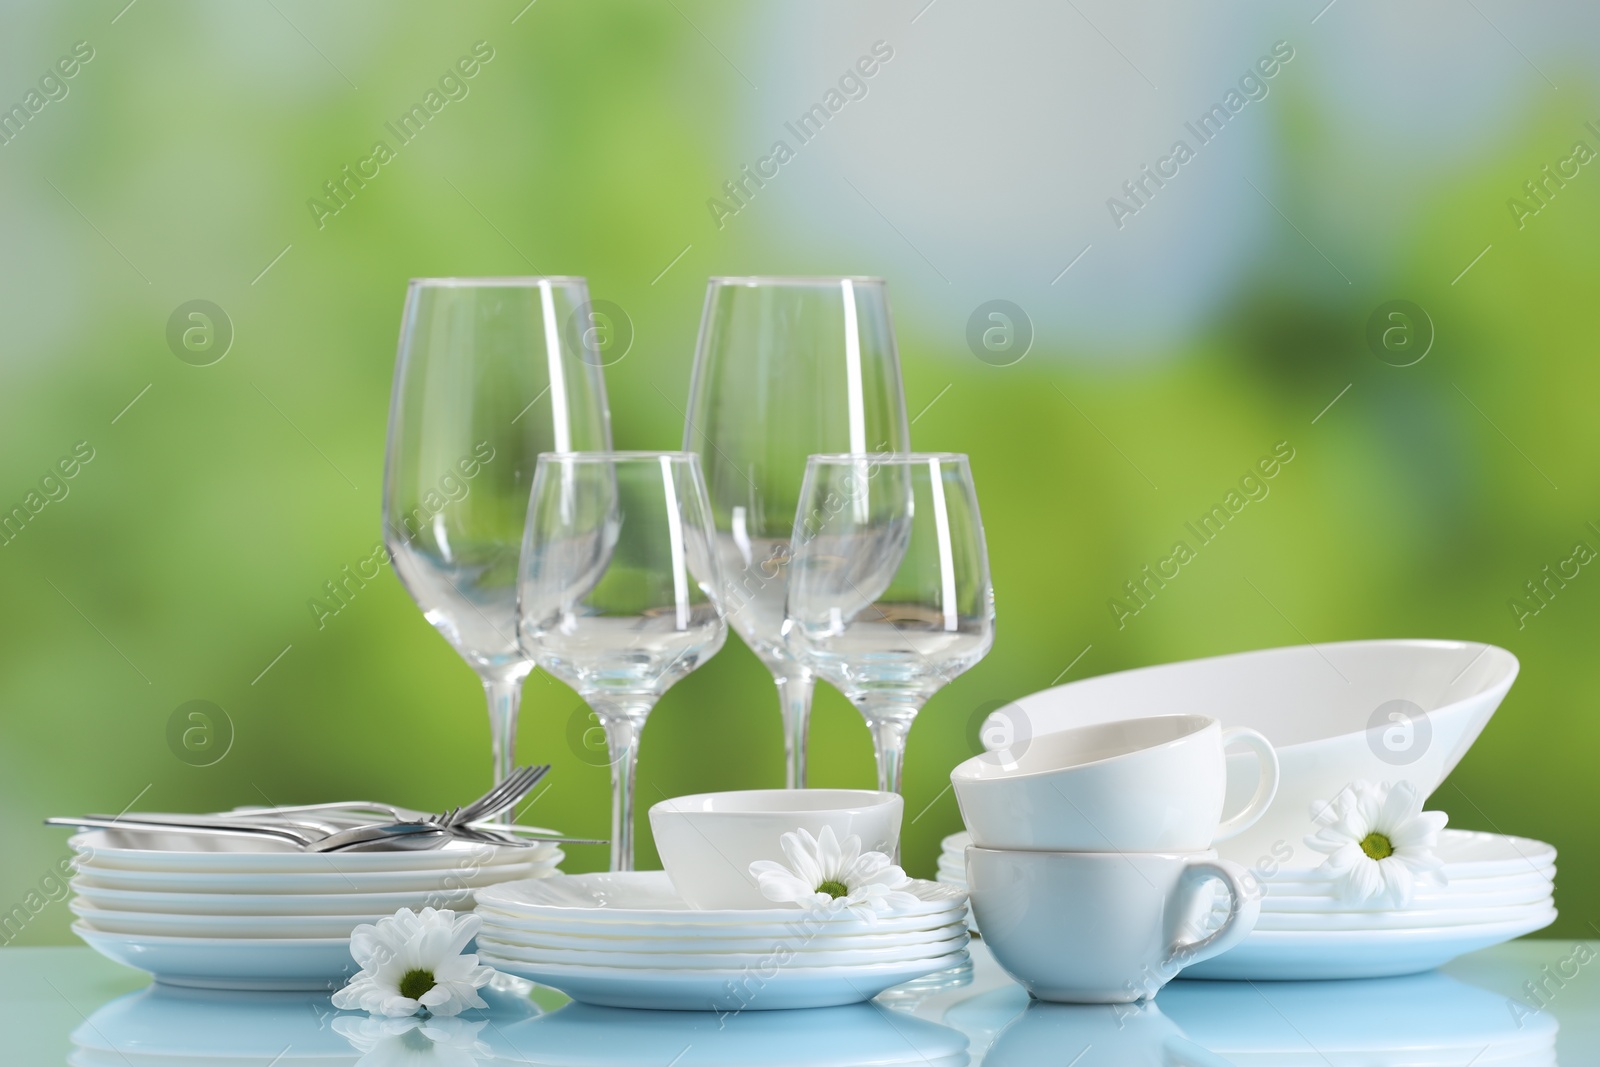 Photo of Set of many clean dishware, cutlery, flowers and glasses on light blue table against blurred green background